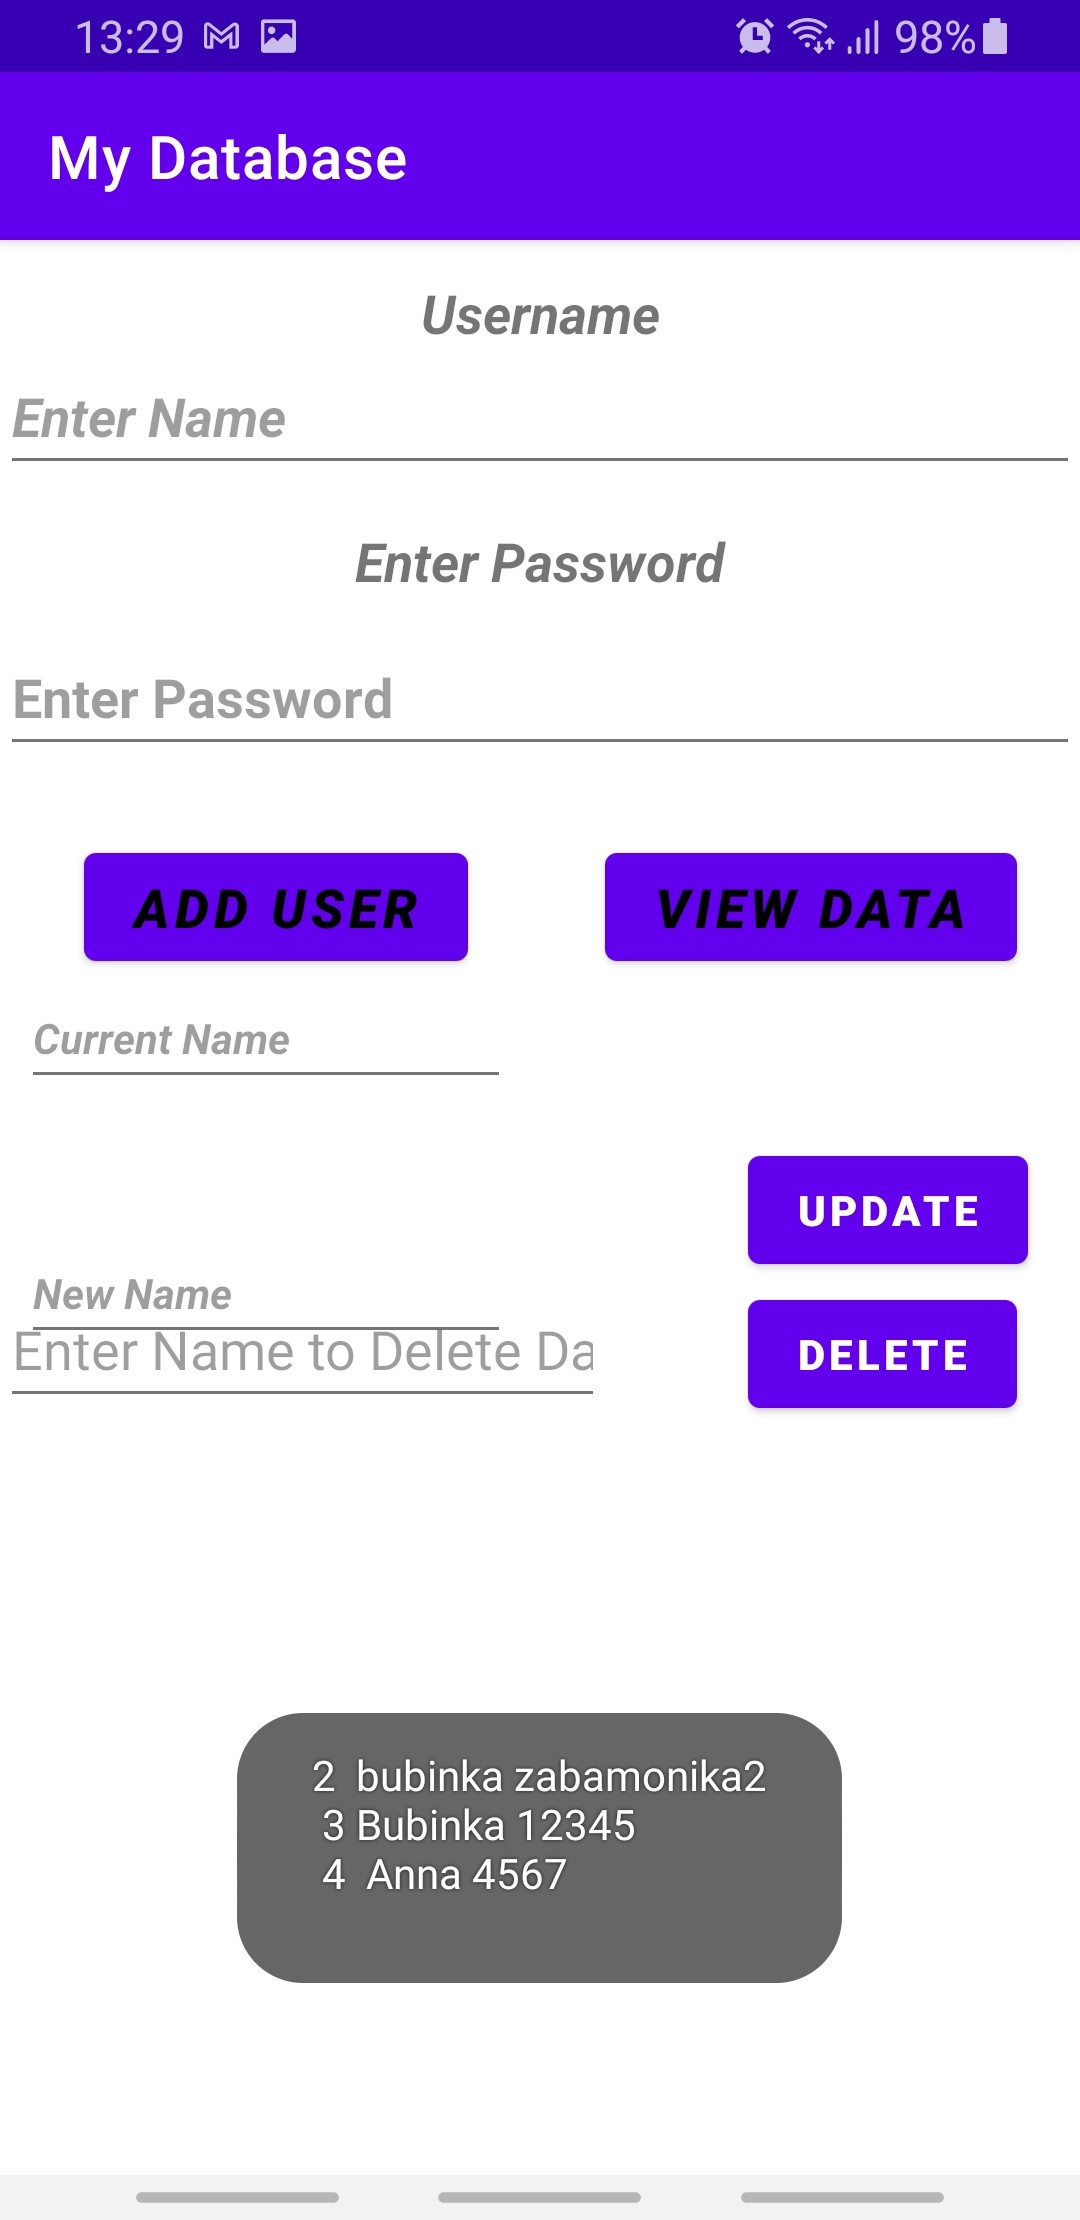 The Android Mobile Database app with access to view data ,delete , update username and save it for further revision